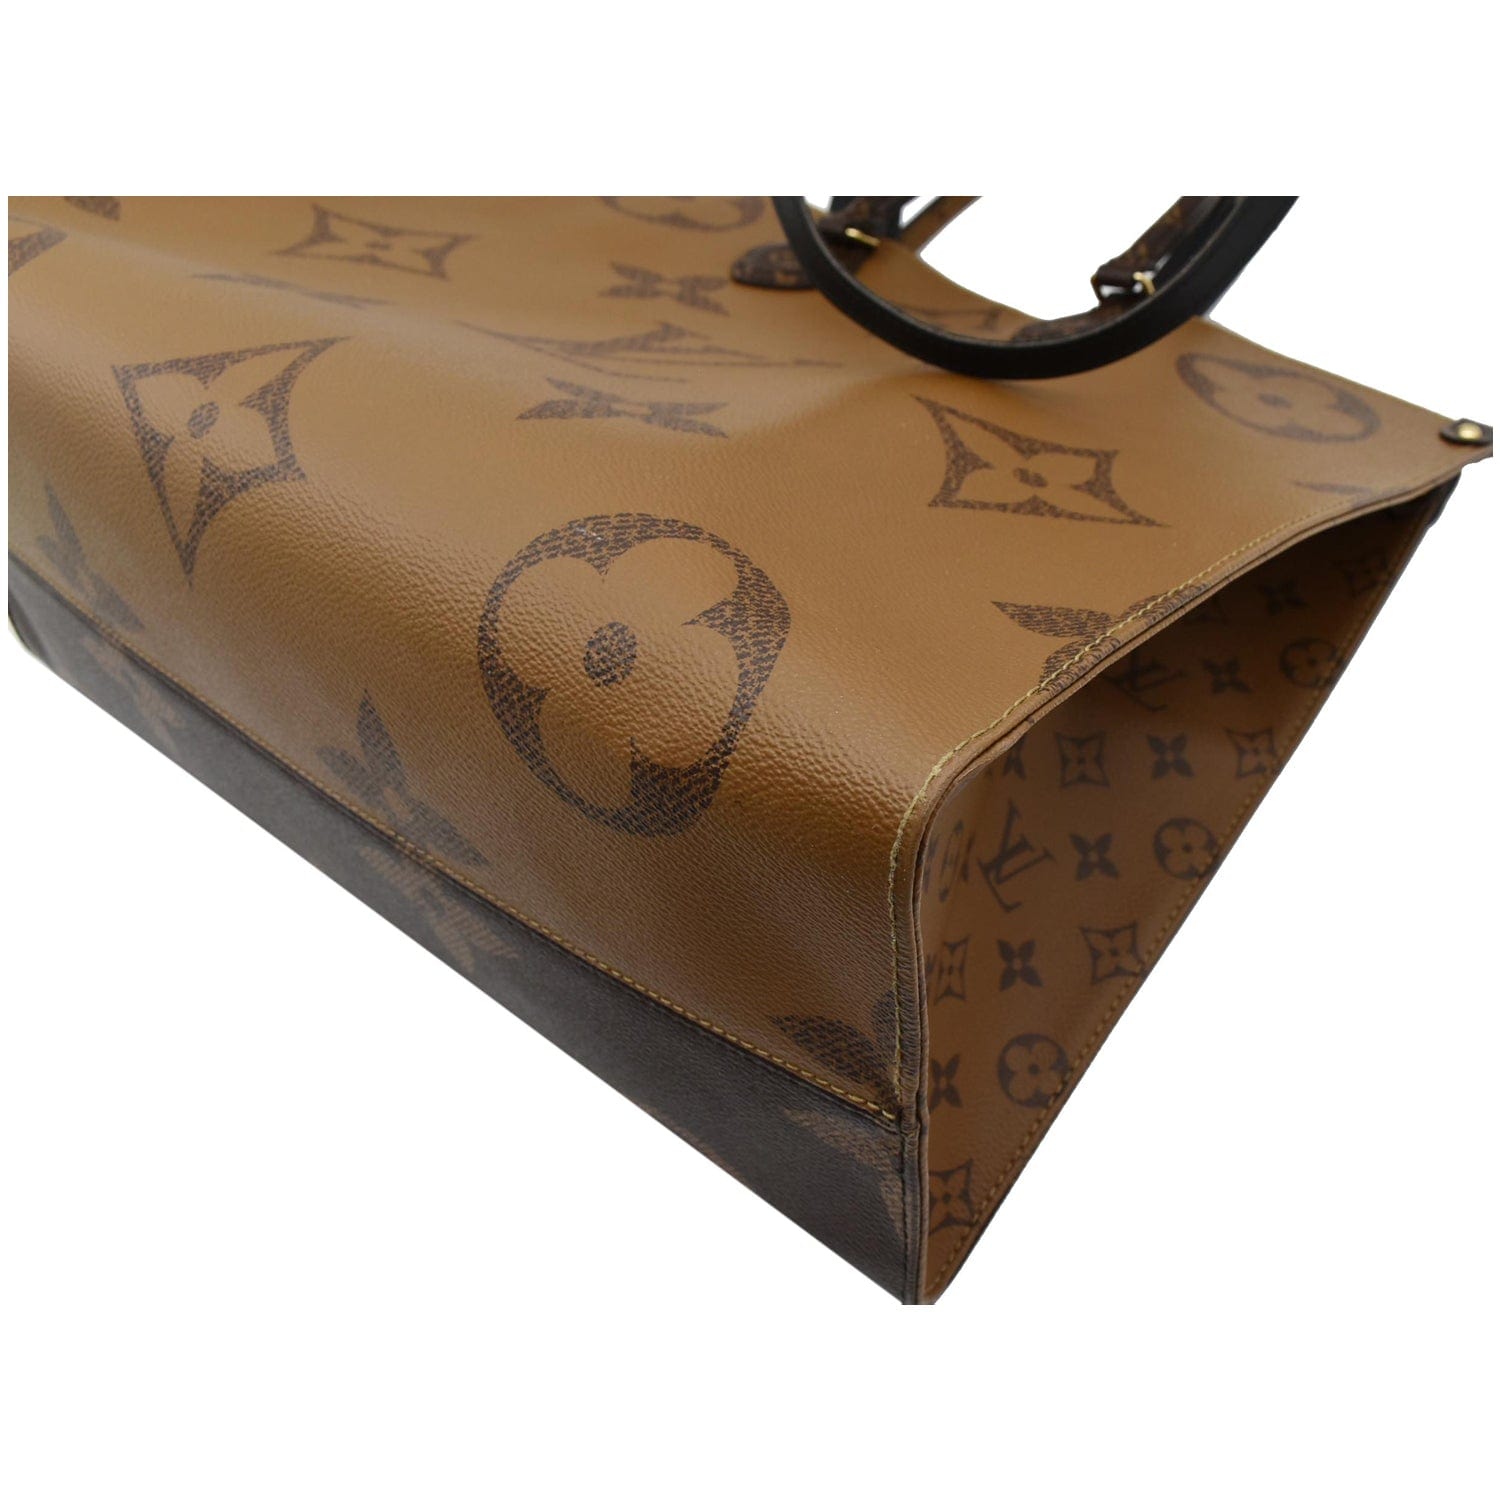 Sold at Auction: An excellent quality, Canvas handbag shaped like Loius  Vuitton Onthego Tote, with Louis Vuitton emblems and logos on the bag,  outer and inner handles, the bag is made of